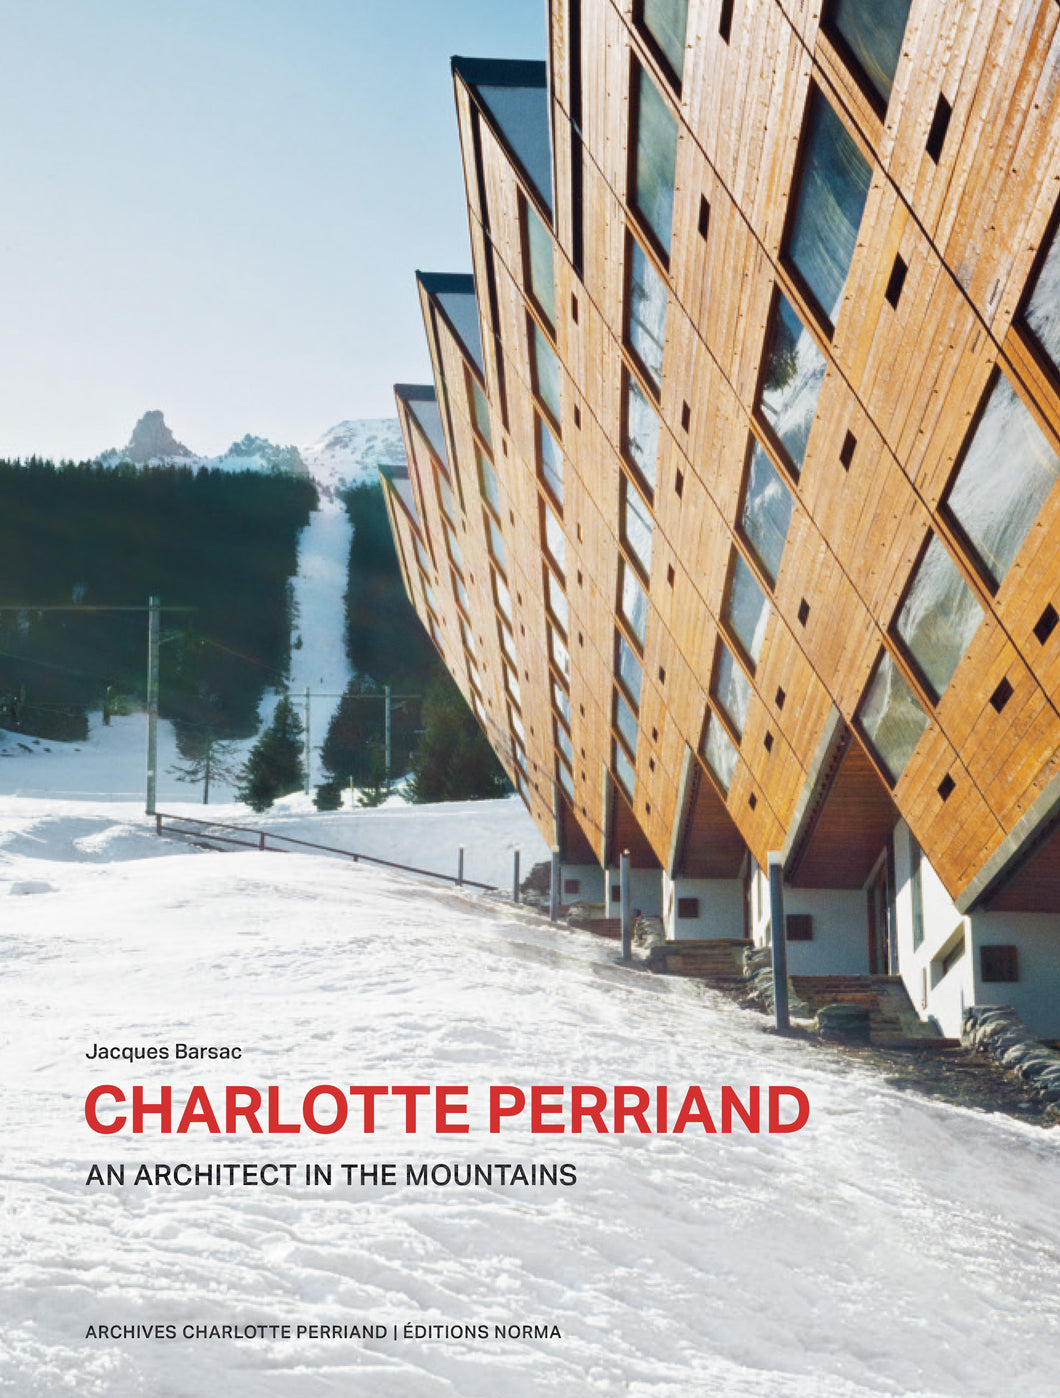 Charlotte Perriand, the legacy of the architect and designer